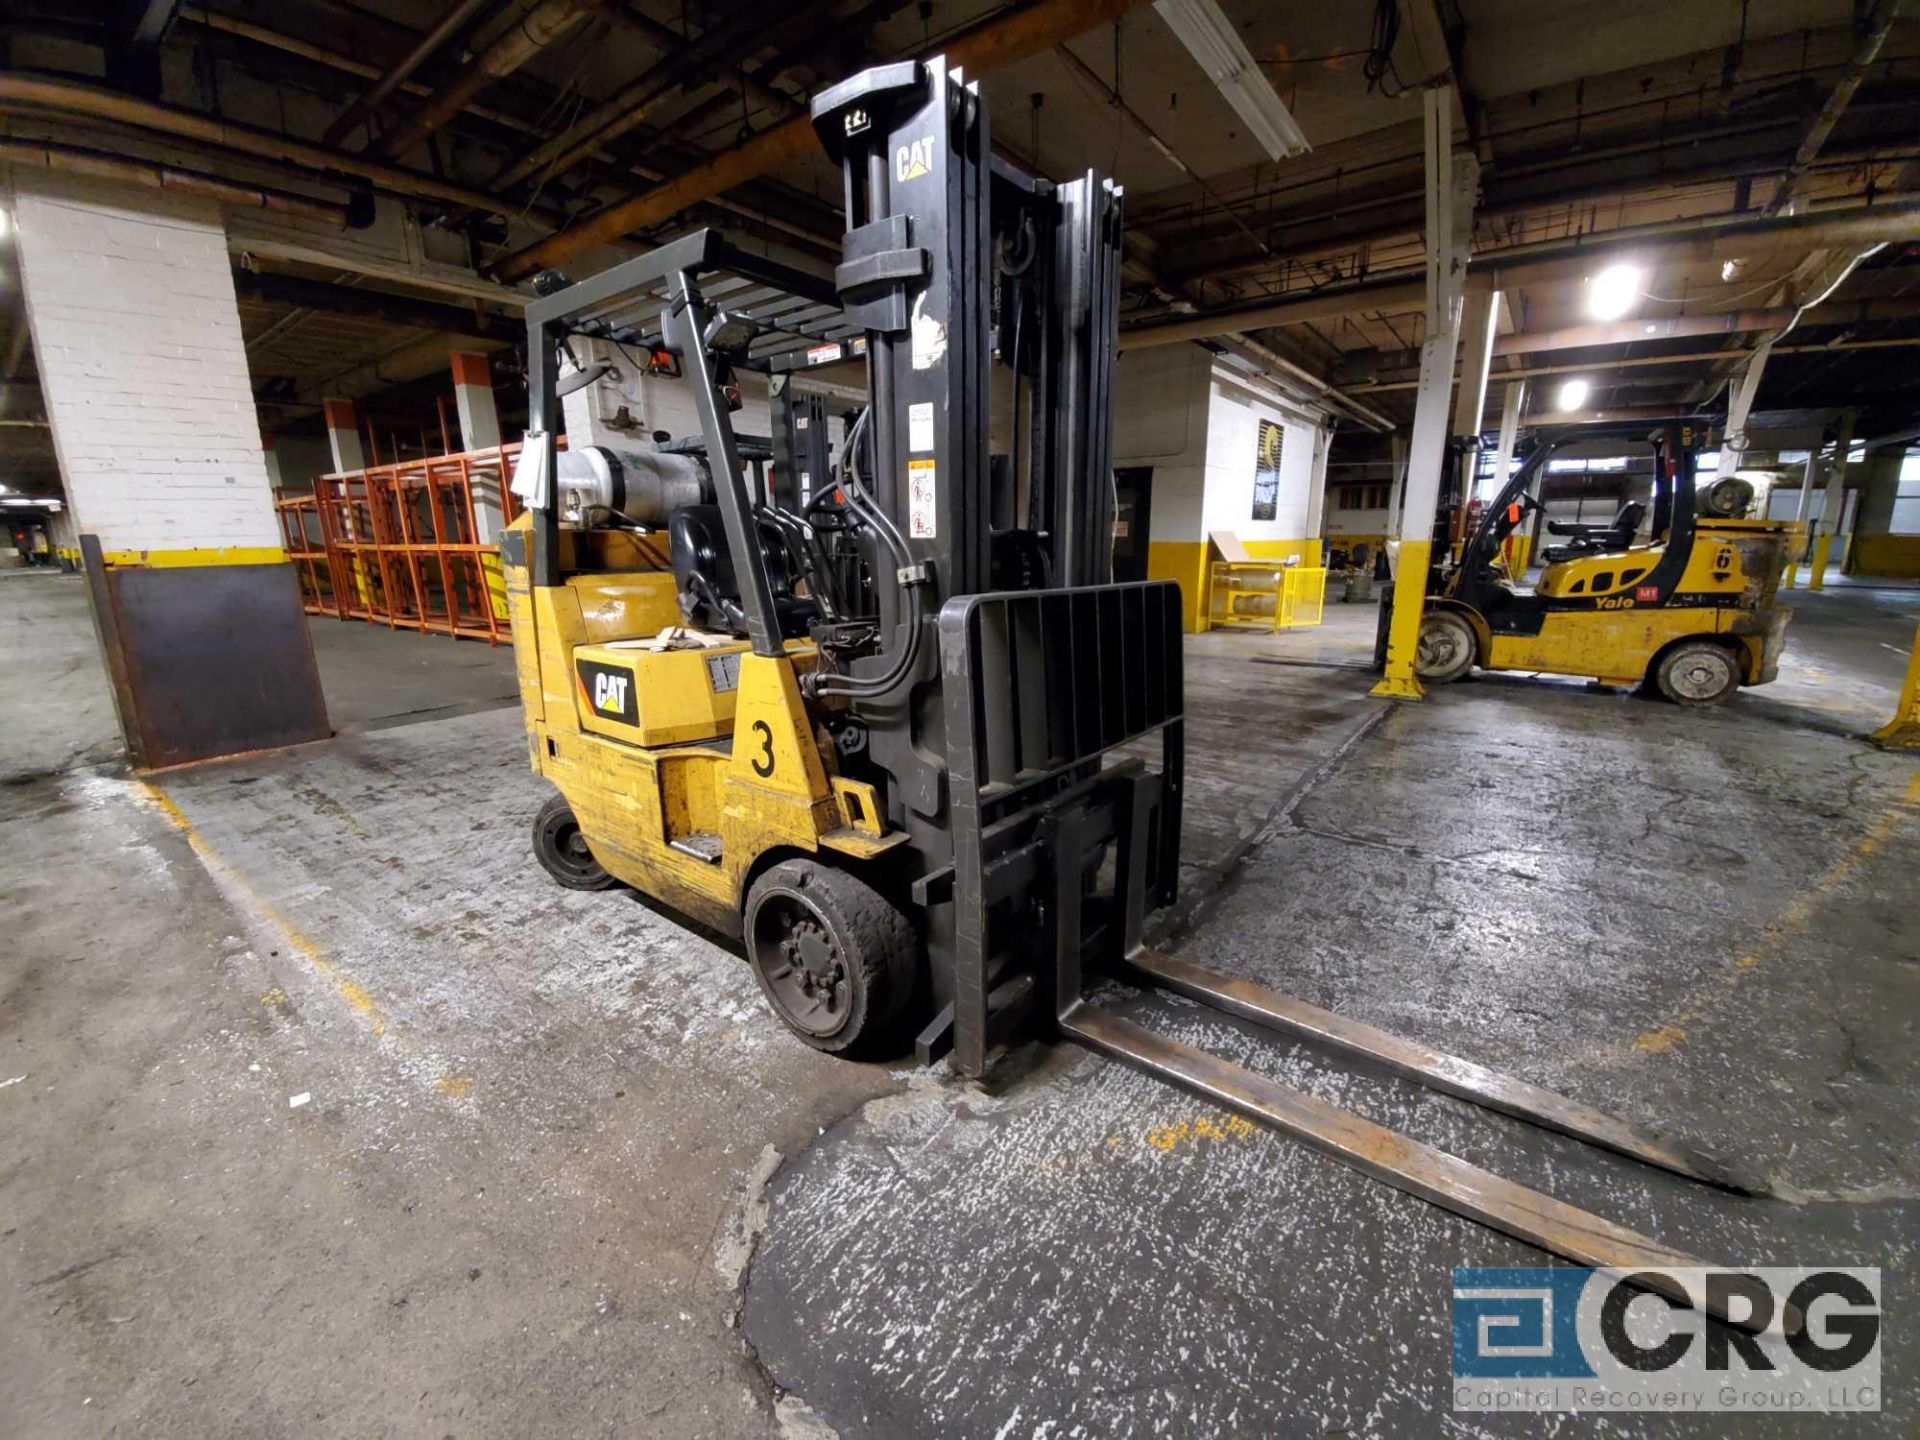 Caterpillar m/n GC40KS2 solid tire LP forklift, 7400 lb. capacity, 201 in. mast with side shift